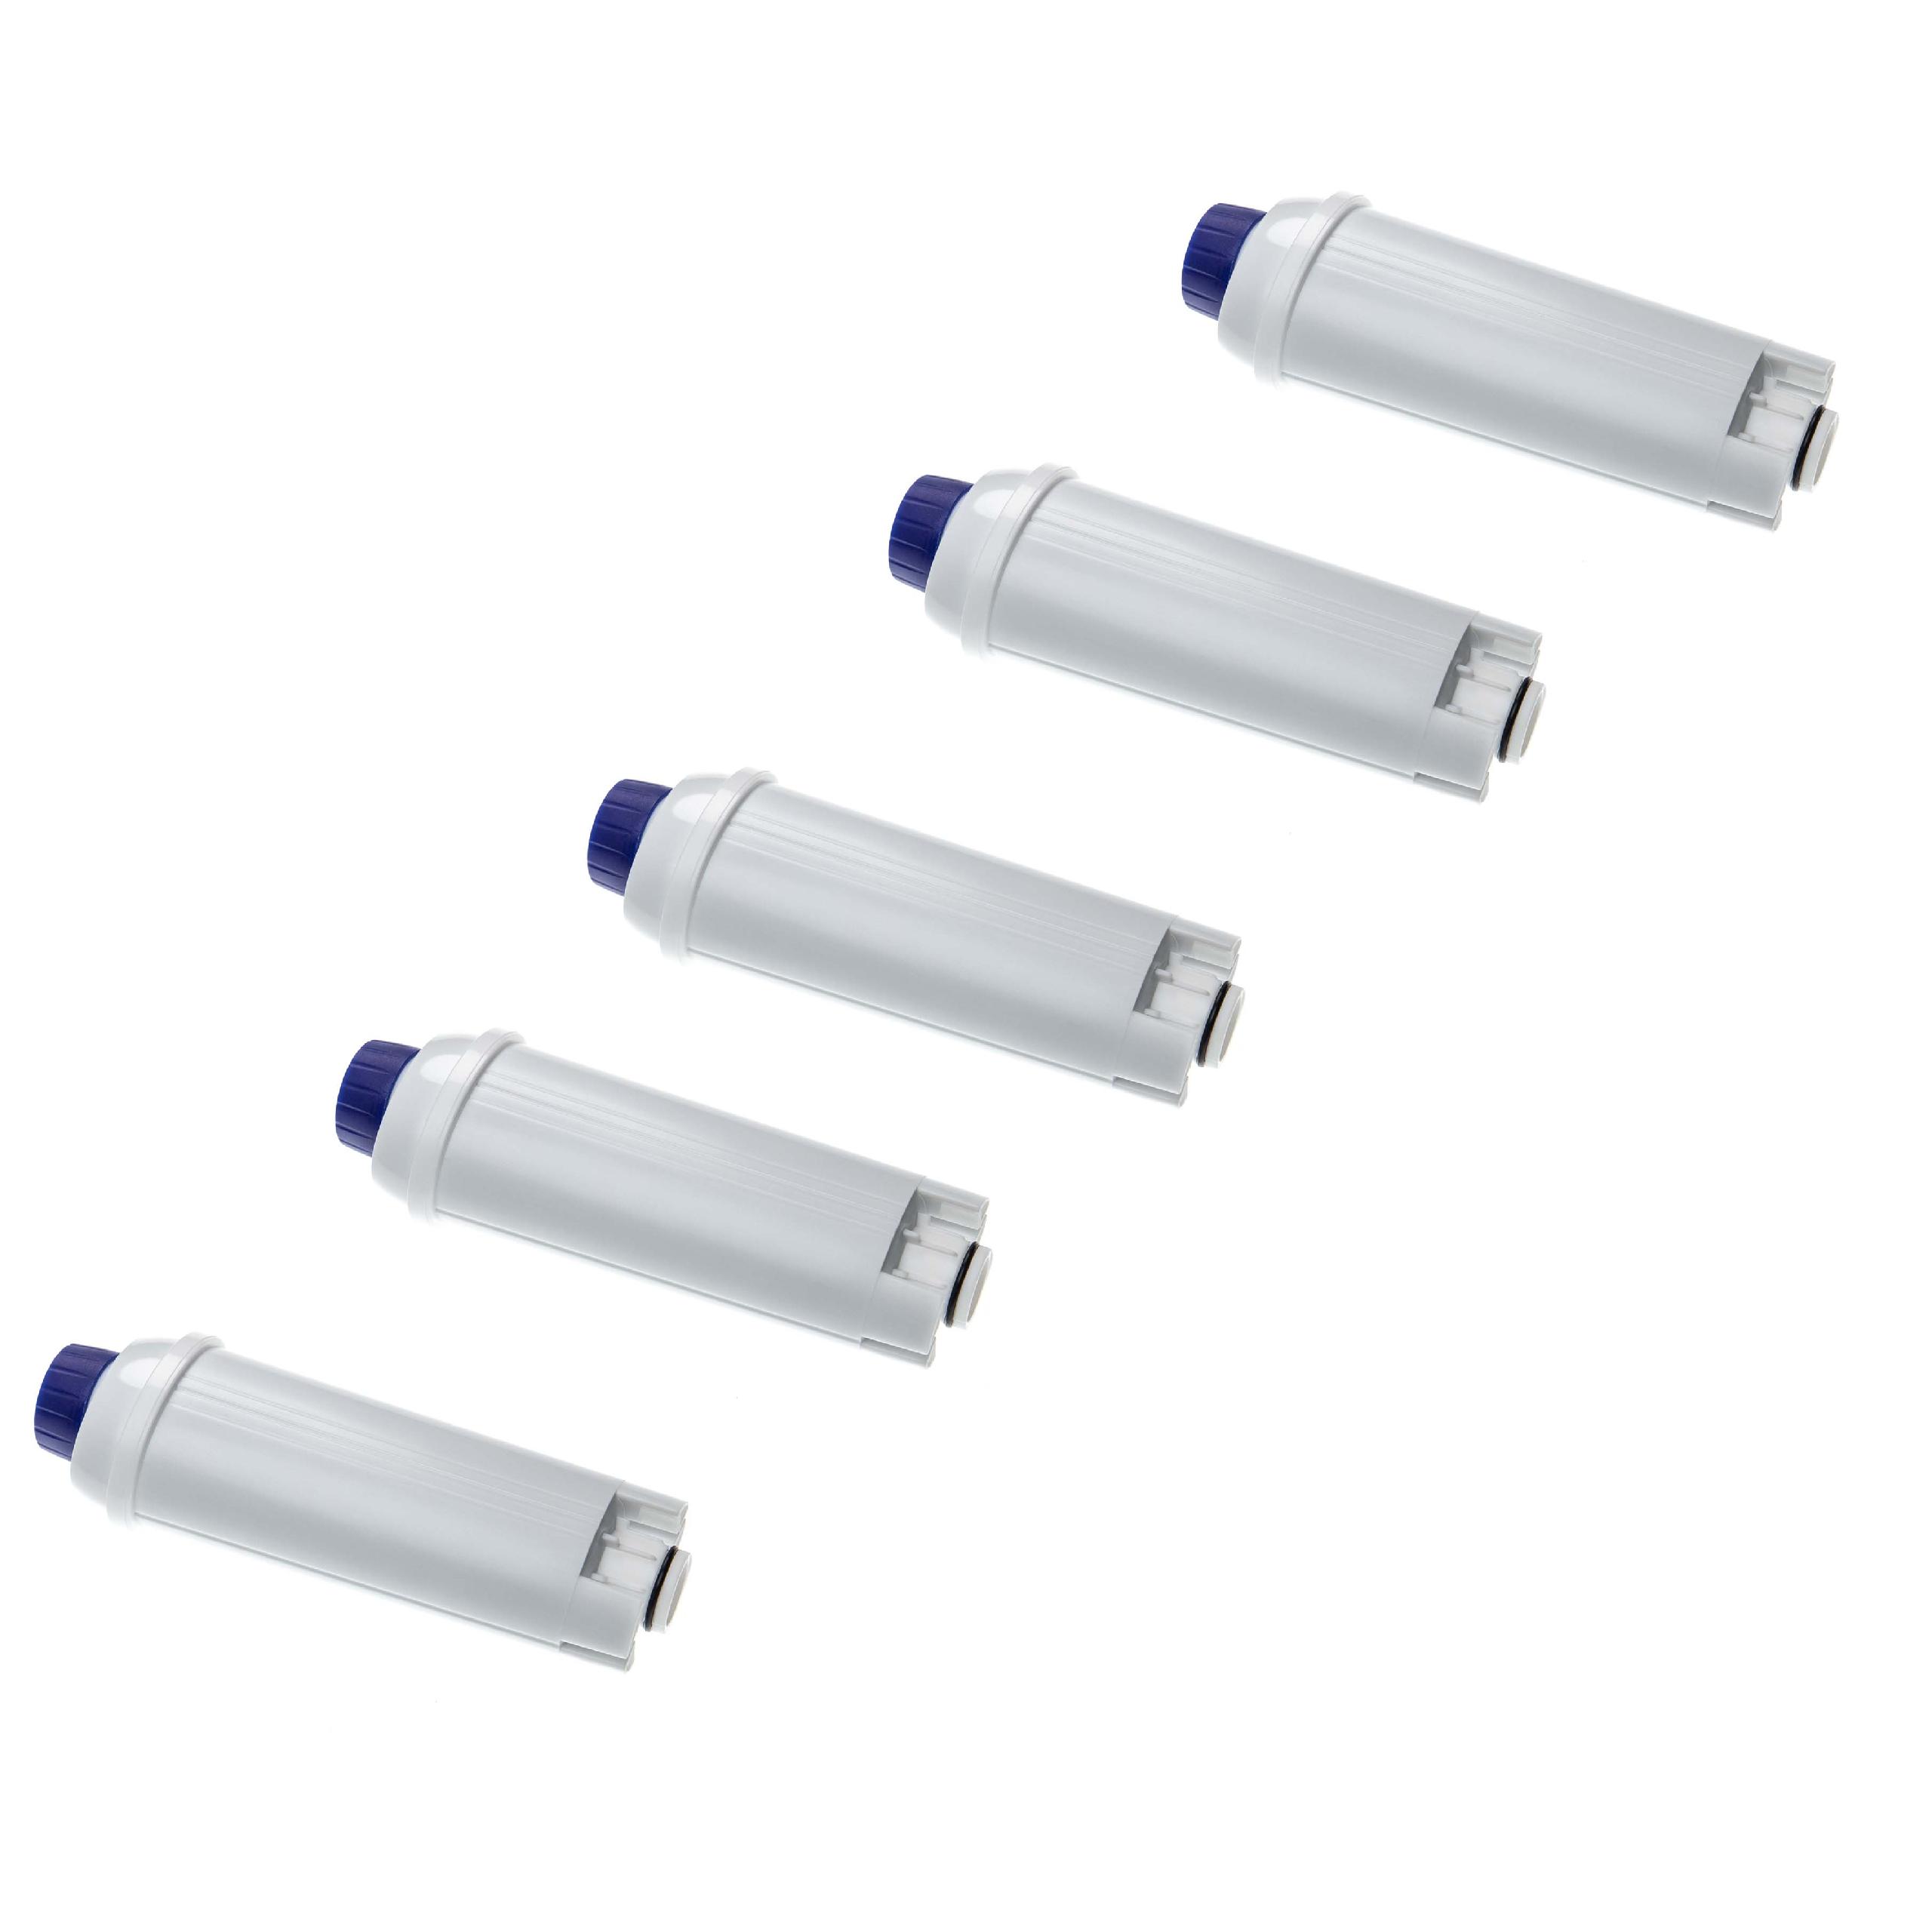 5x Water Filter replaces DeLonghi DLS C002, 8004399327252, 5513292811 for DeLonghi Coffee Machine - White